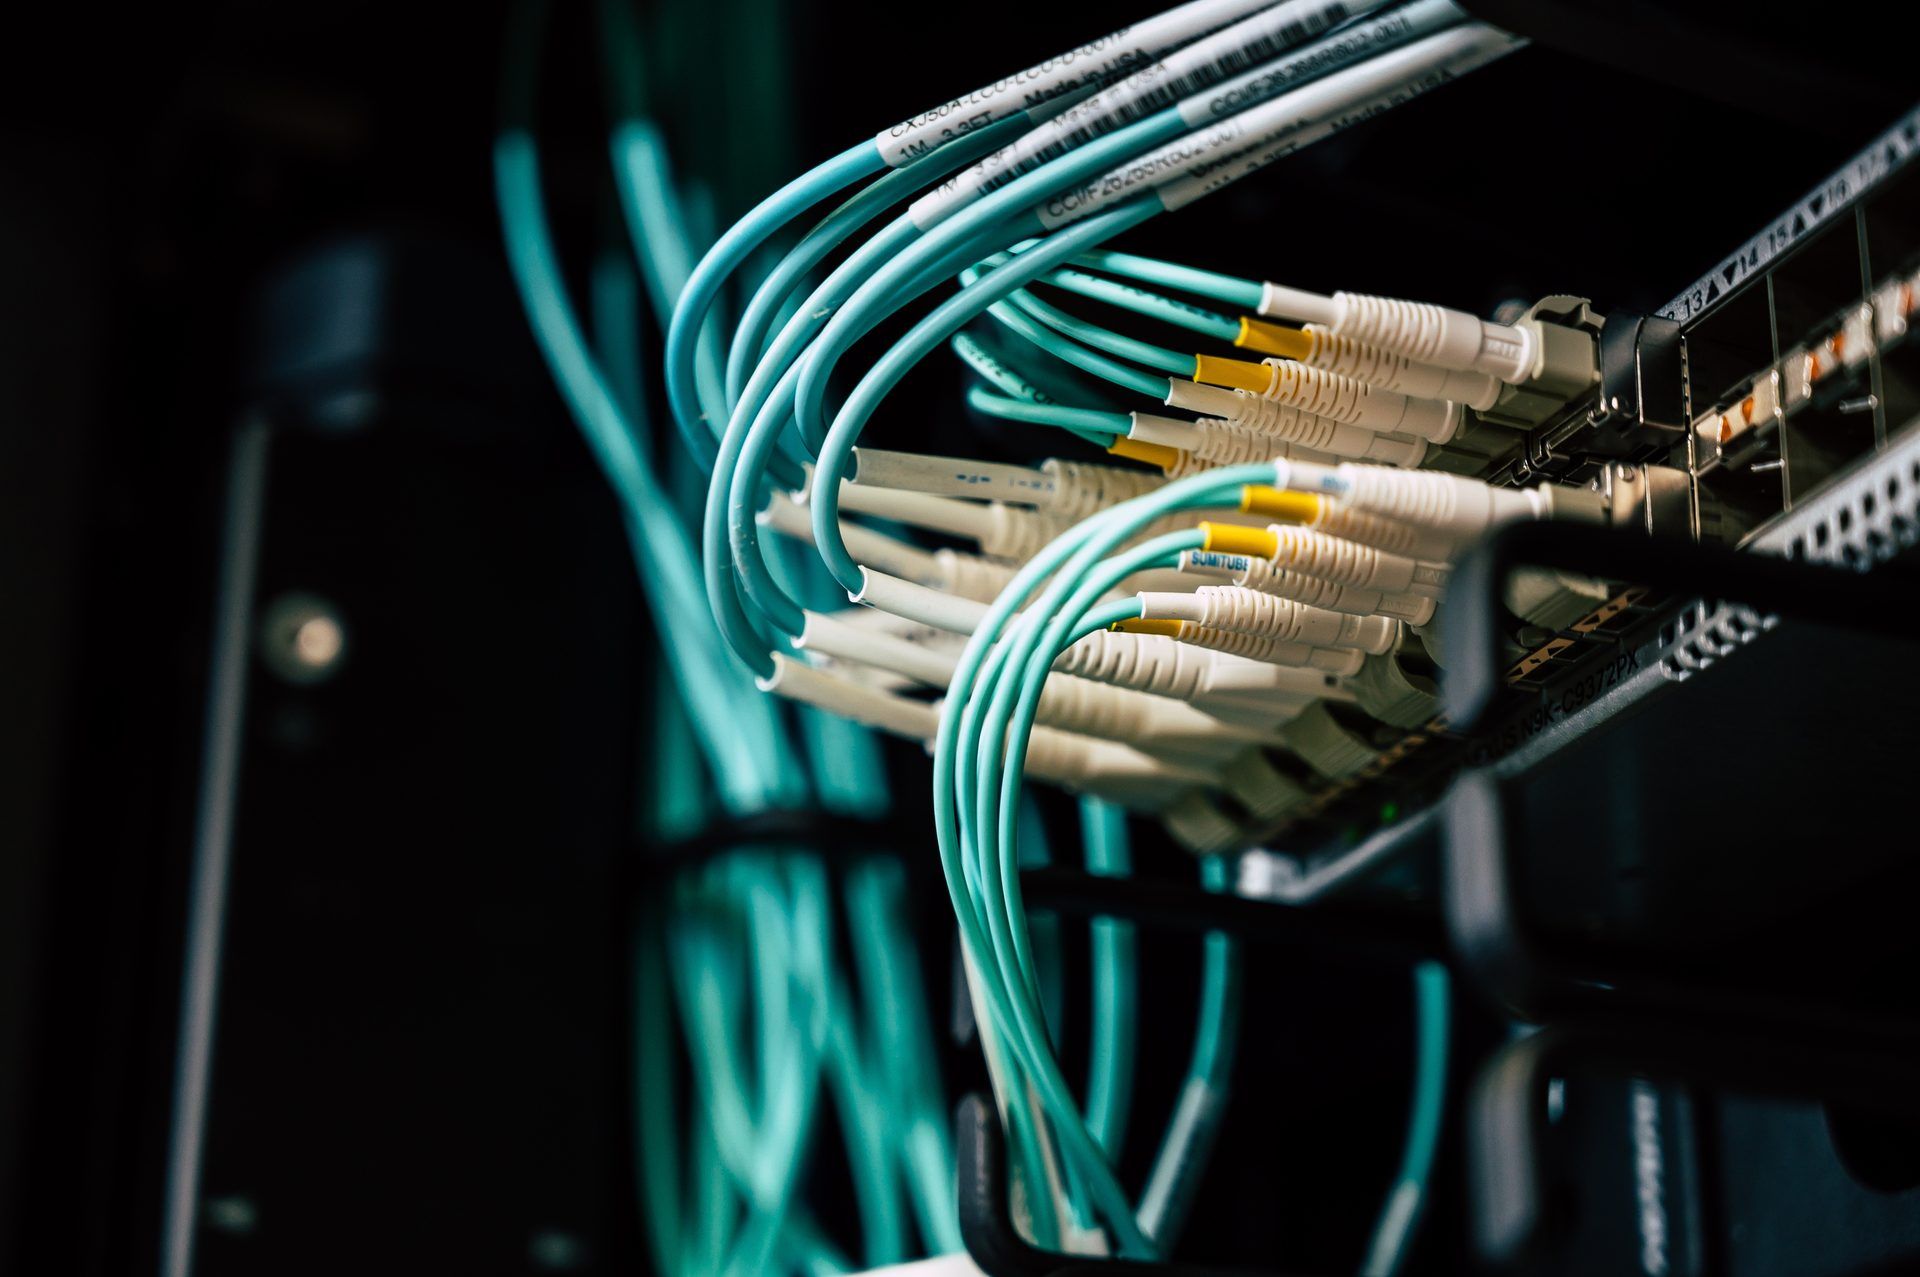 Network redundancy is the safety net of business continuity